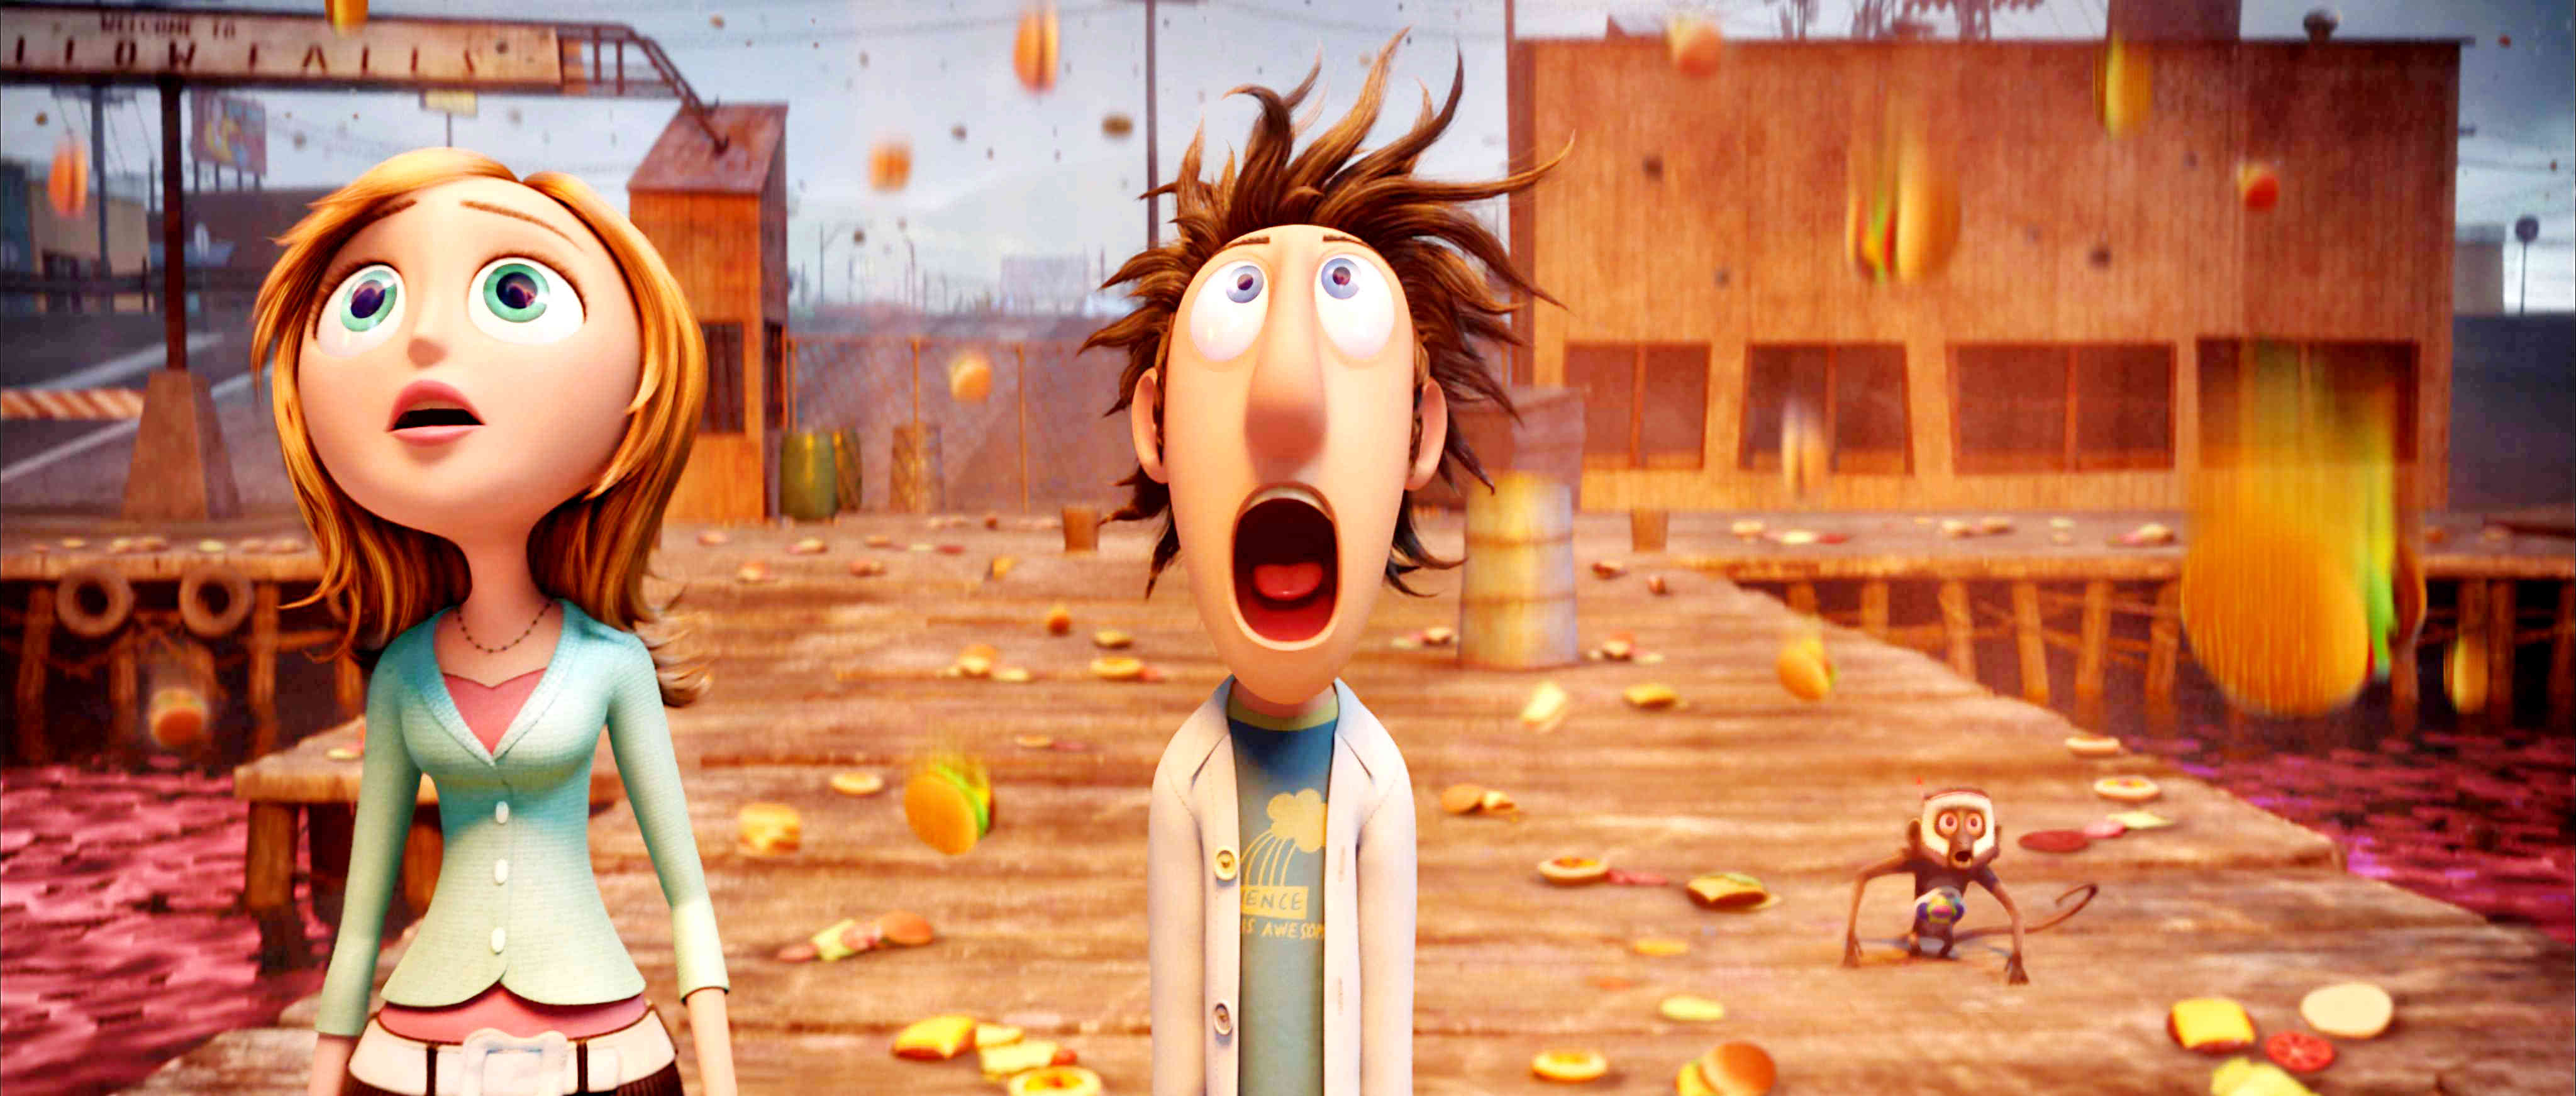 Cloudy With A Chance Of Meatballs #8